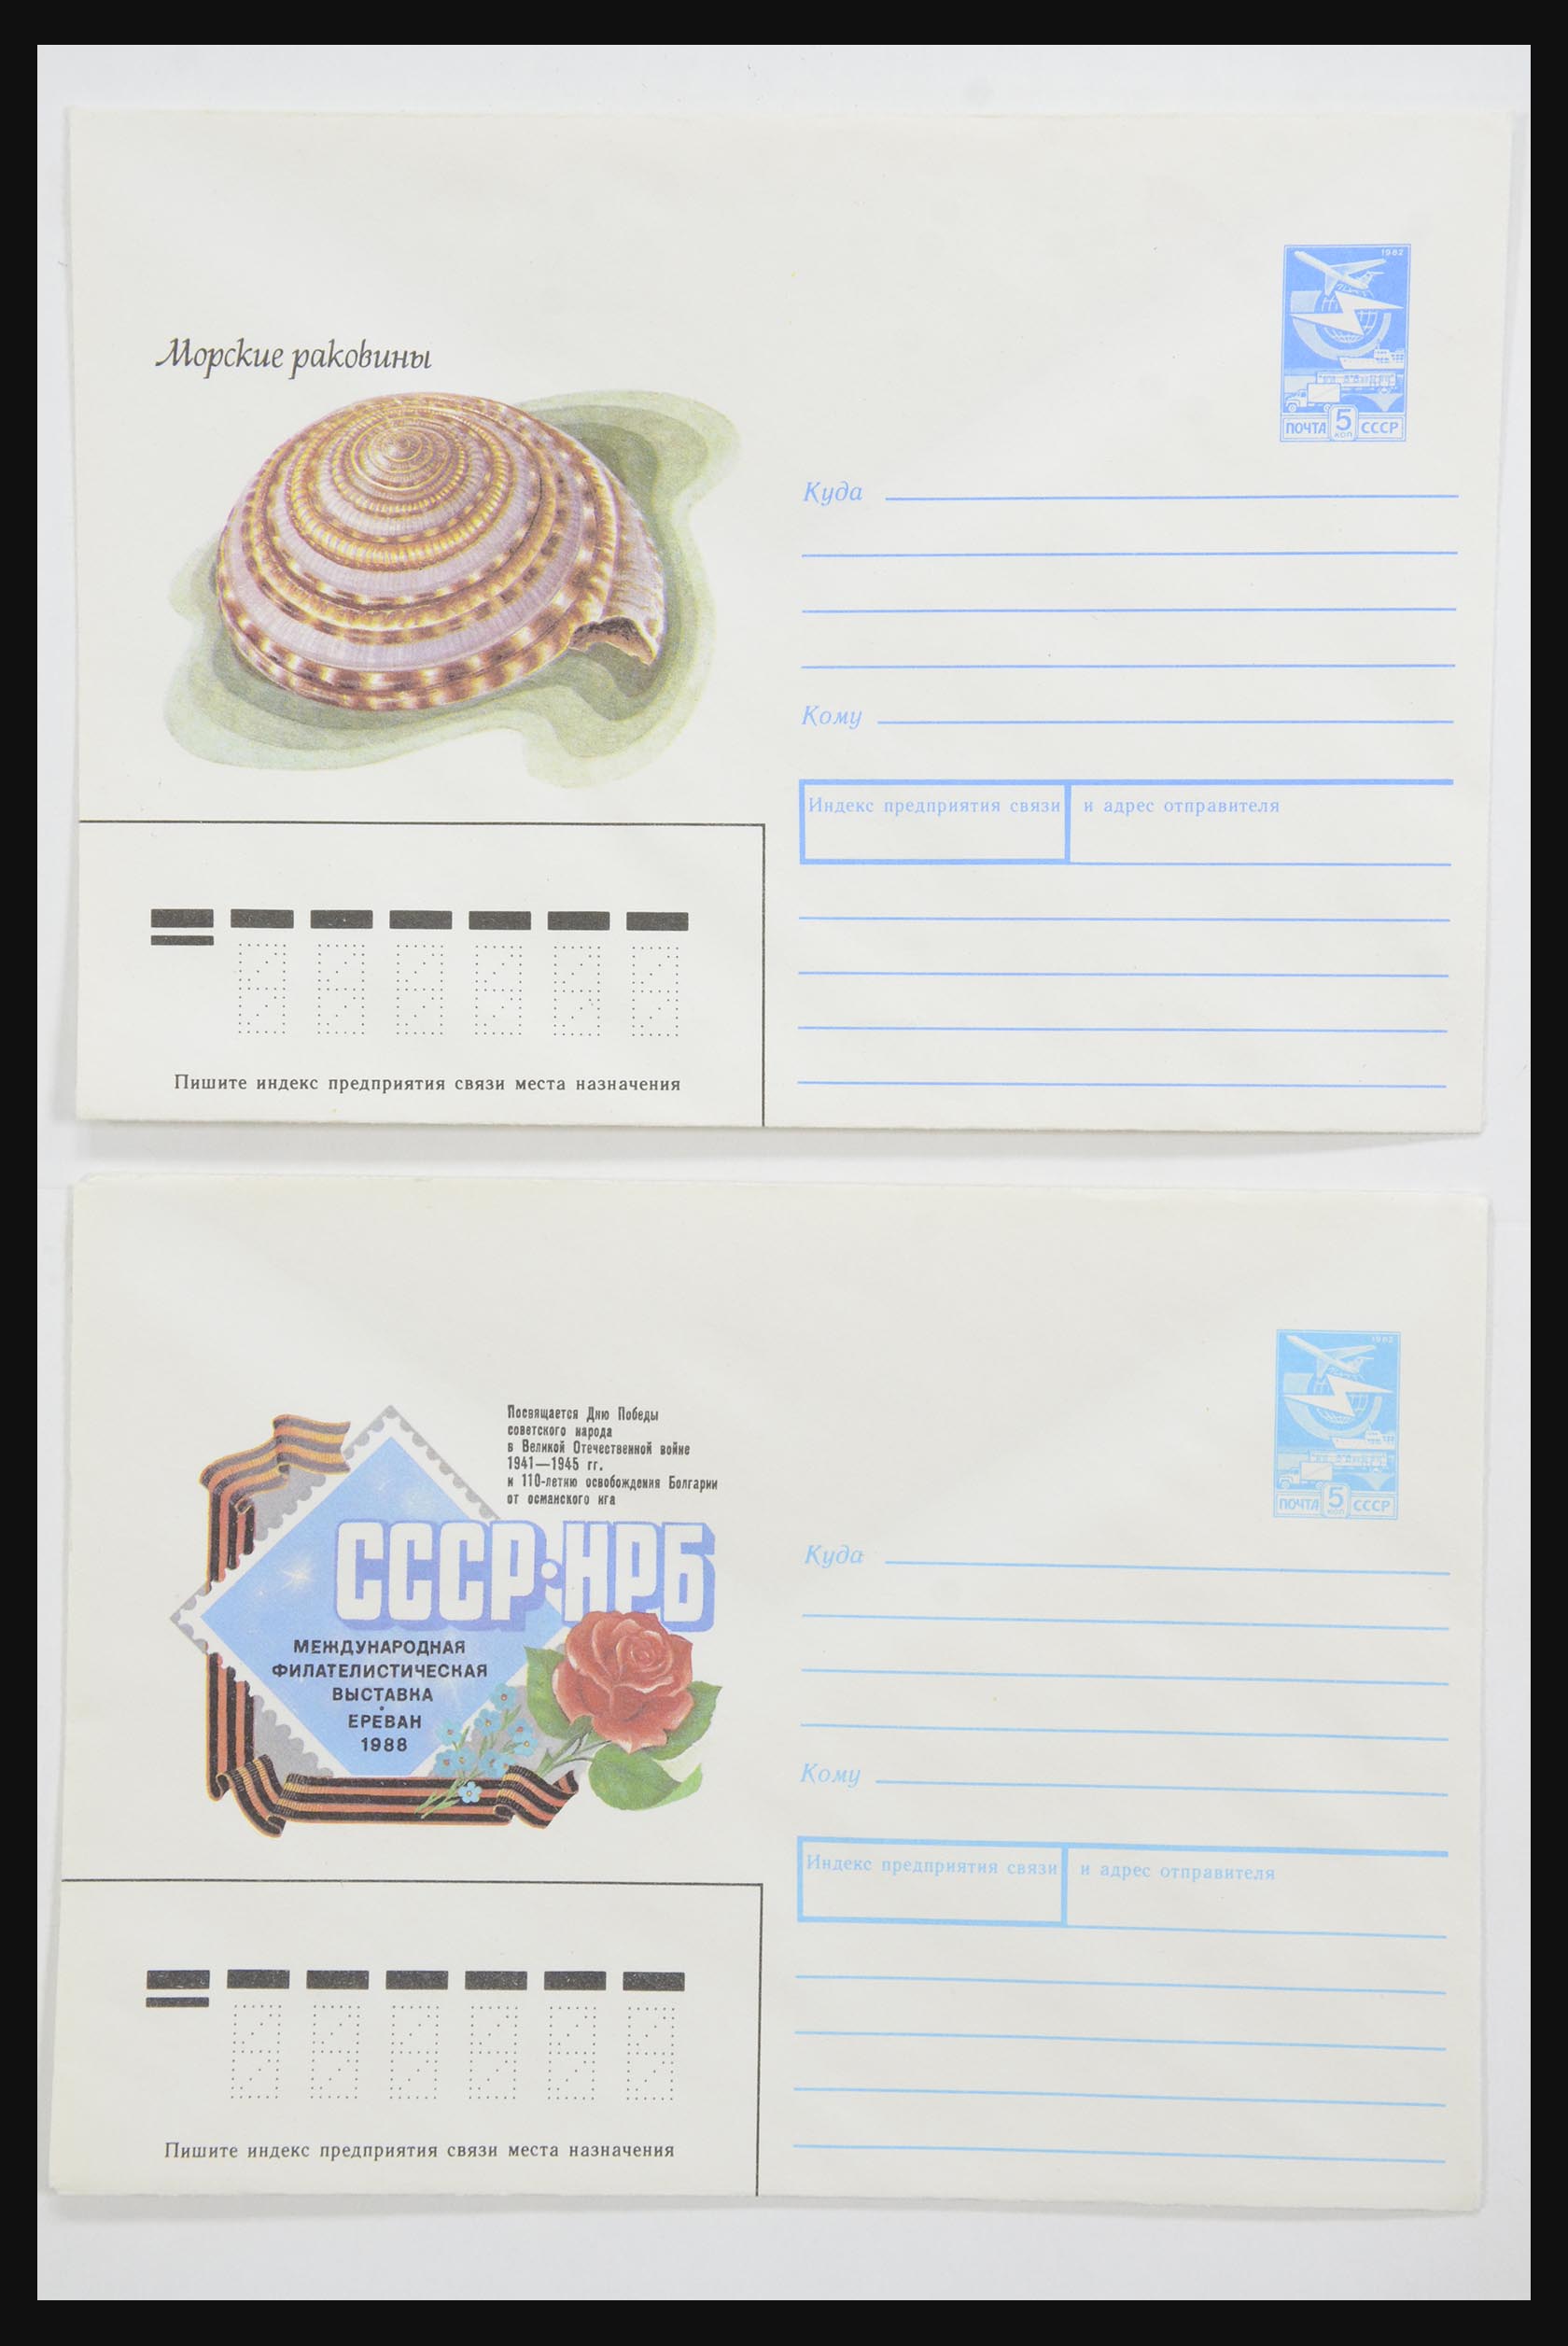 31928 0059 - 31928 Eastern Europe covers 1960's-1990's.